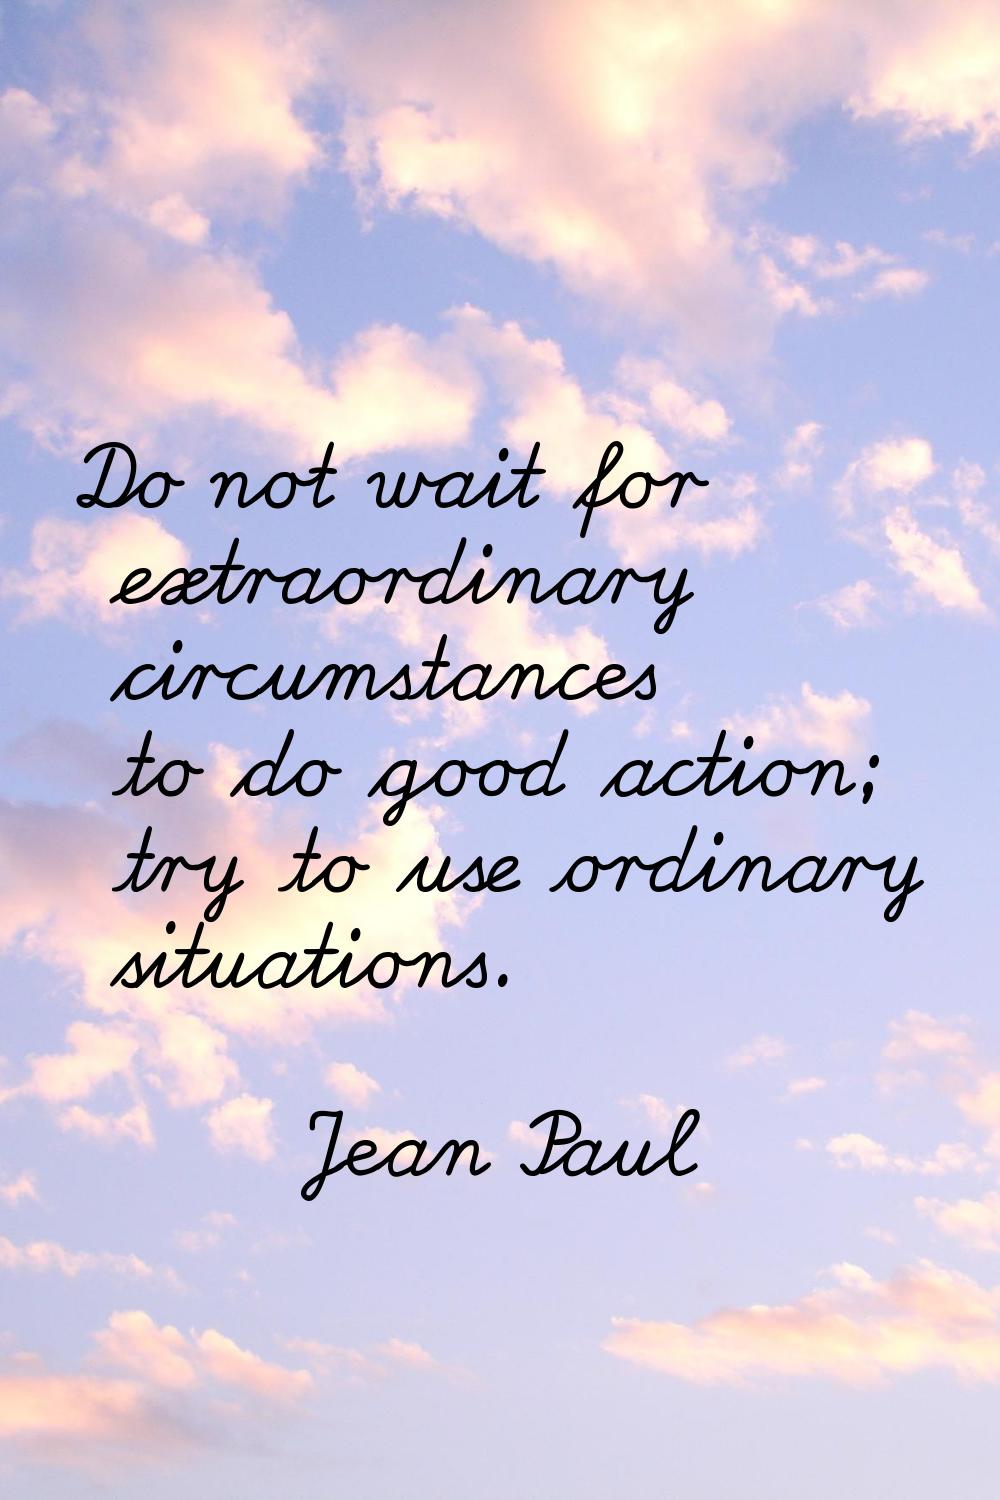 Do not wait for extraordinary circumstances to do good action; try to use ordinary situations.